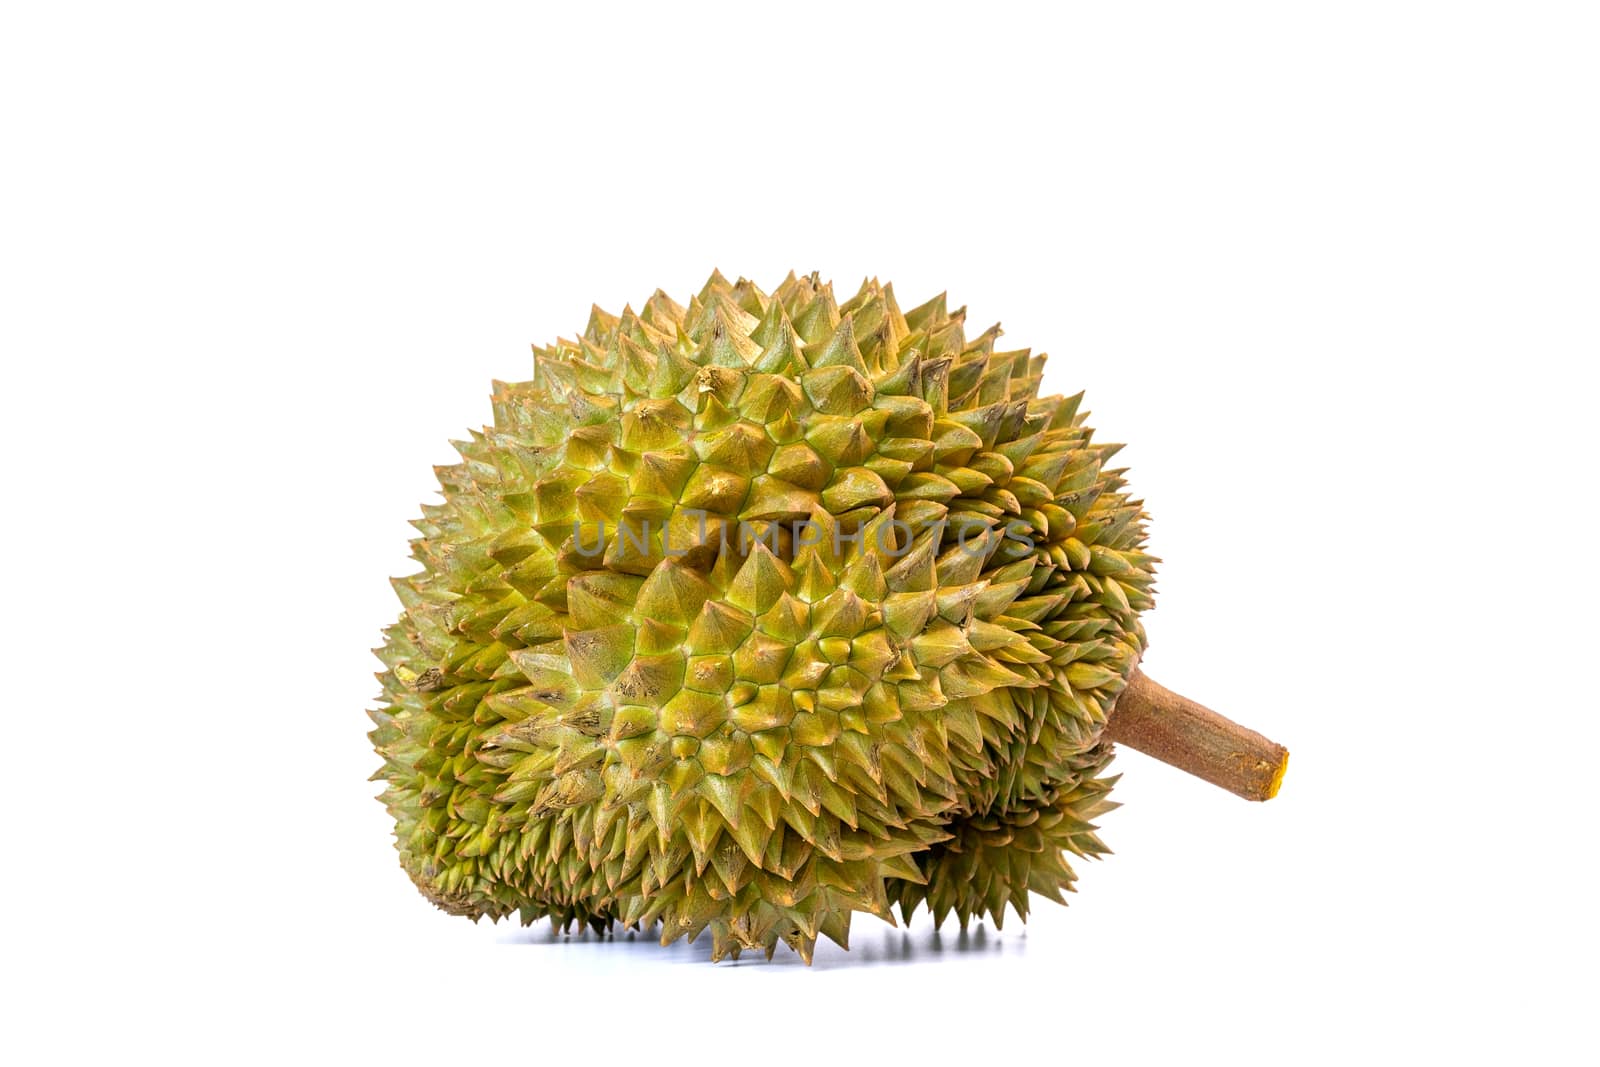 Monthong Durian is the most widely exported fruit in Thailand, isolated on white background.